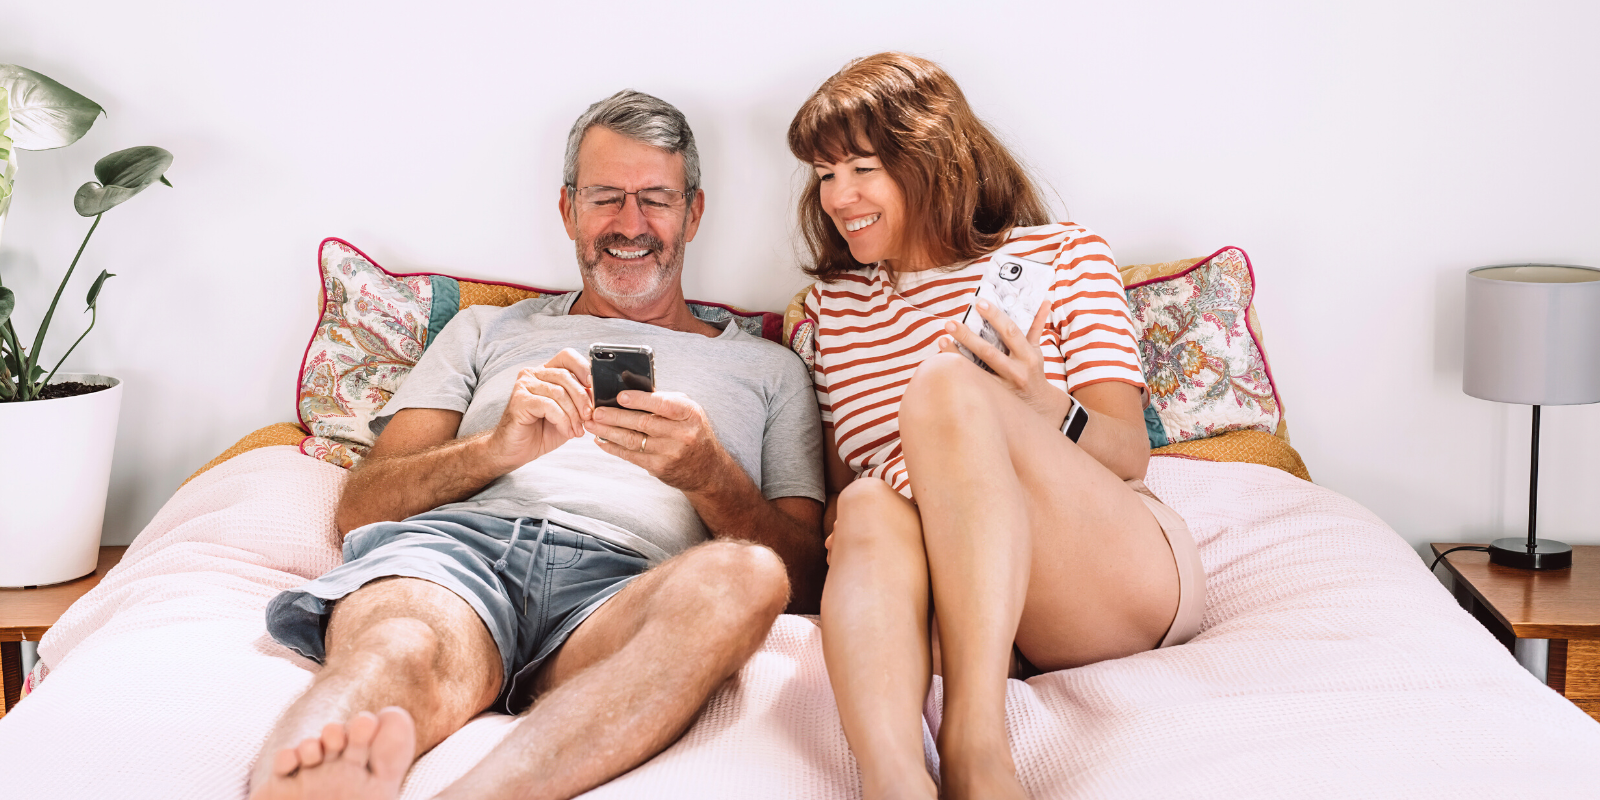 Man and woman over 50 in bed next to each other smiling and chatting